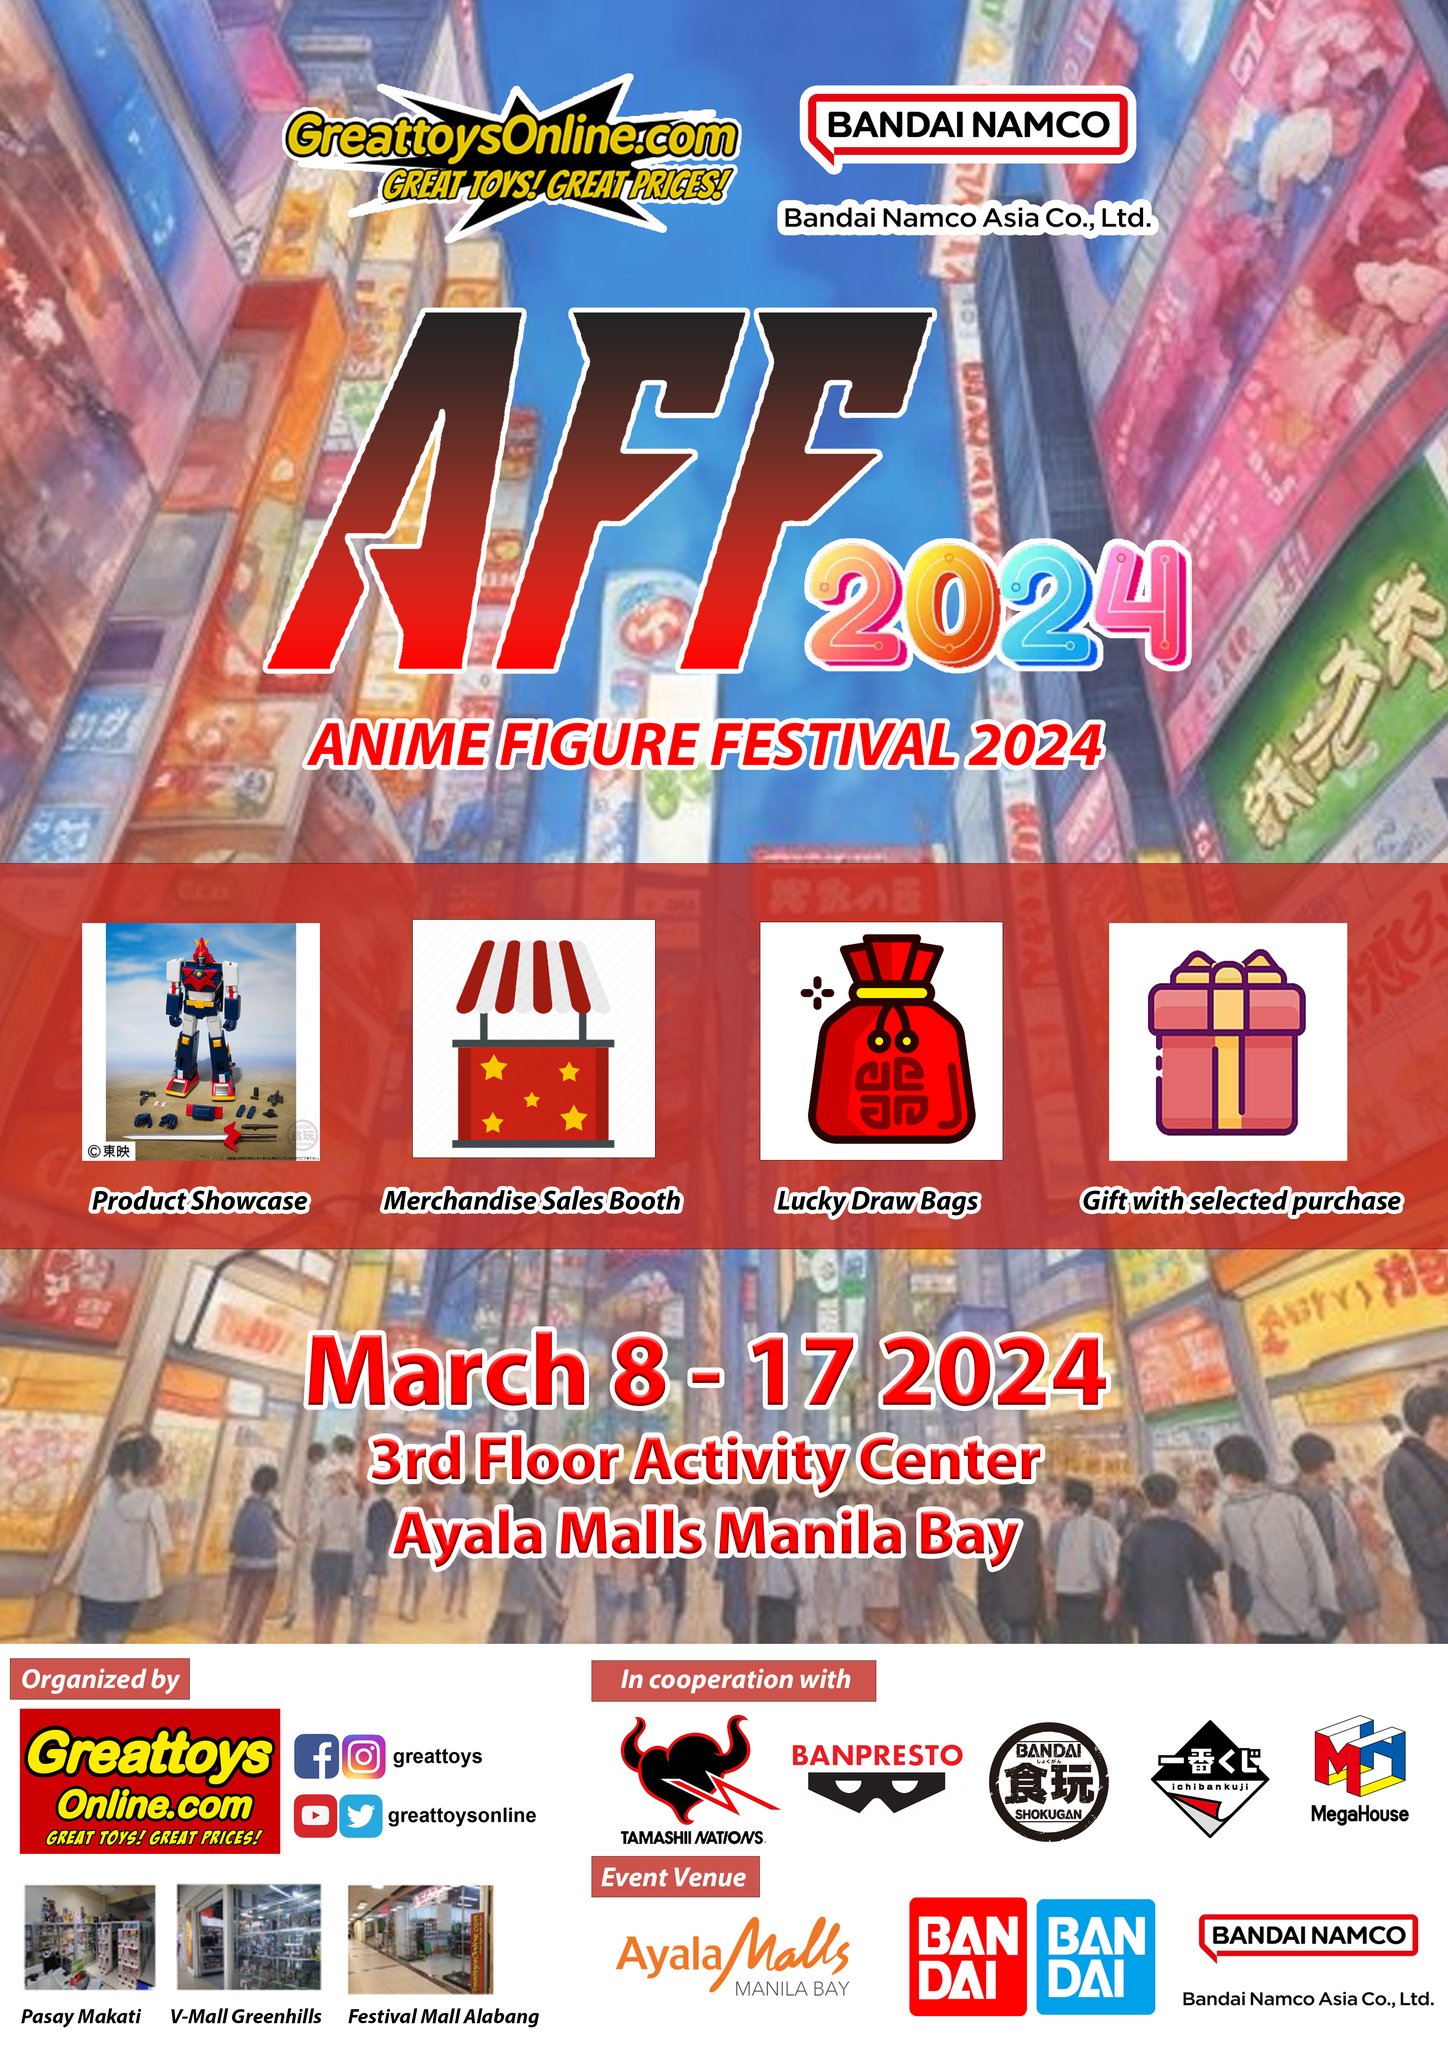 Great-Deals-and-Showcase-at-the-Anime-Figure-Festival-2024-by-GreattoysOnline.com-cover